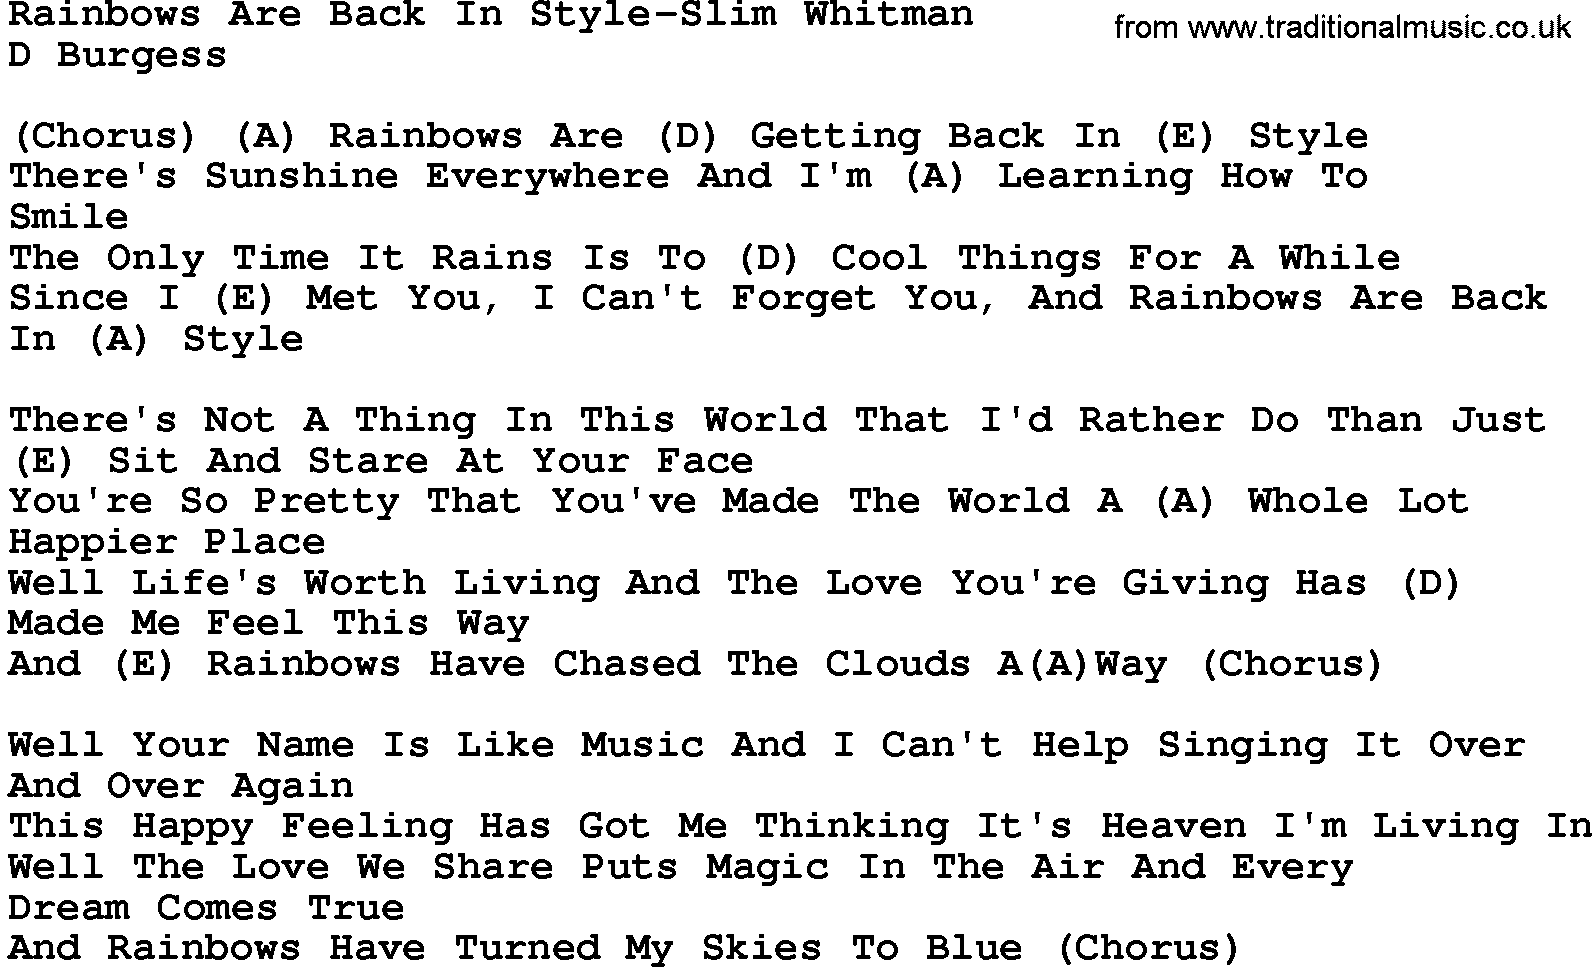 Country music song: Rainbows Are Back In Style-Slim Whitman lyrics and chords